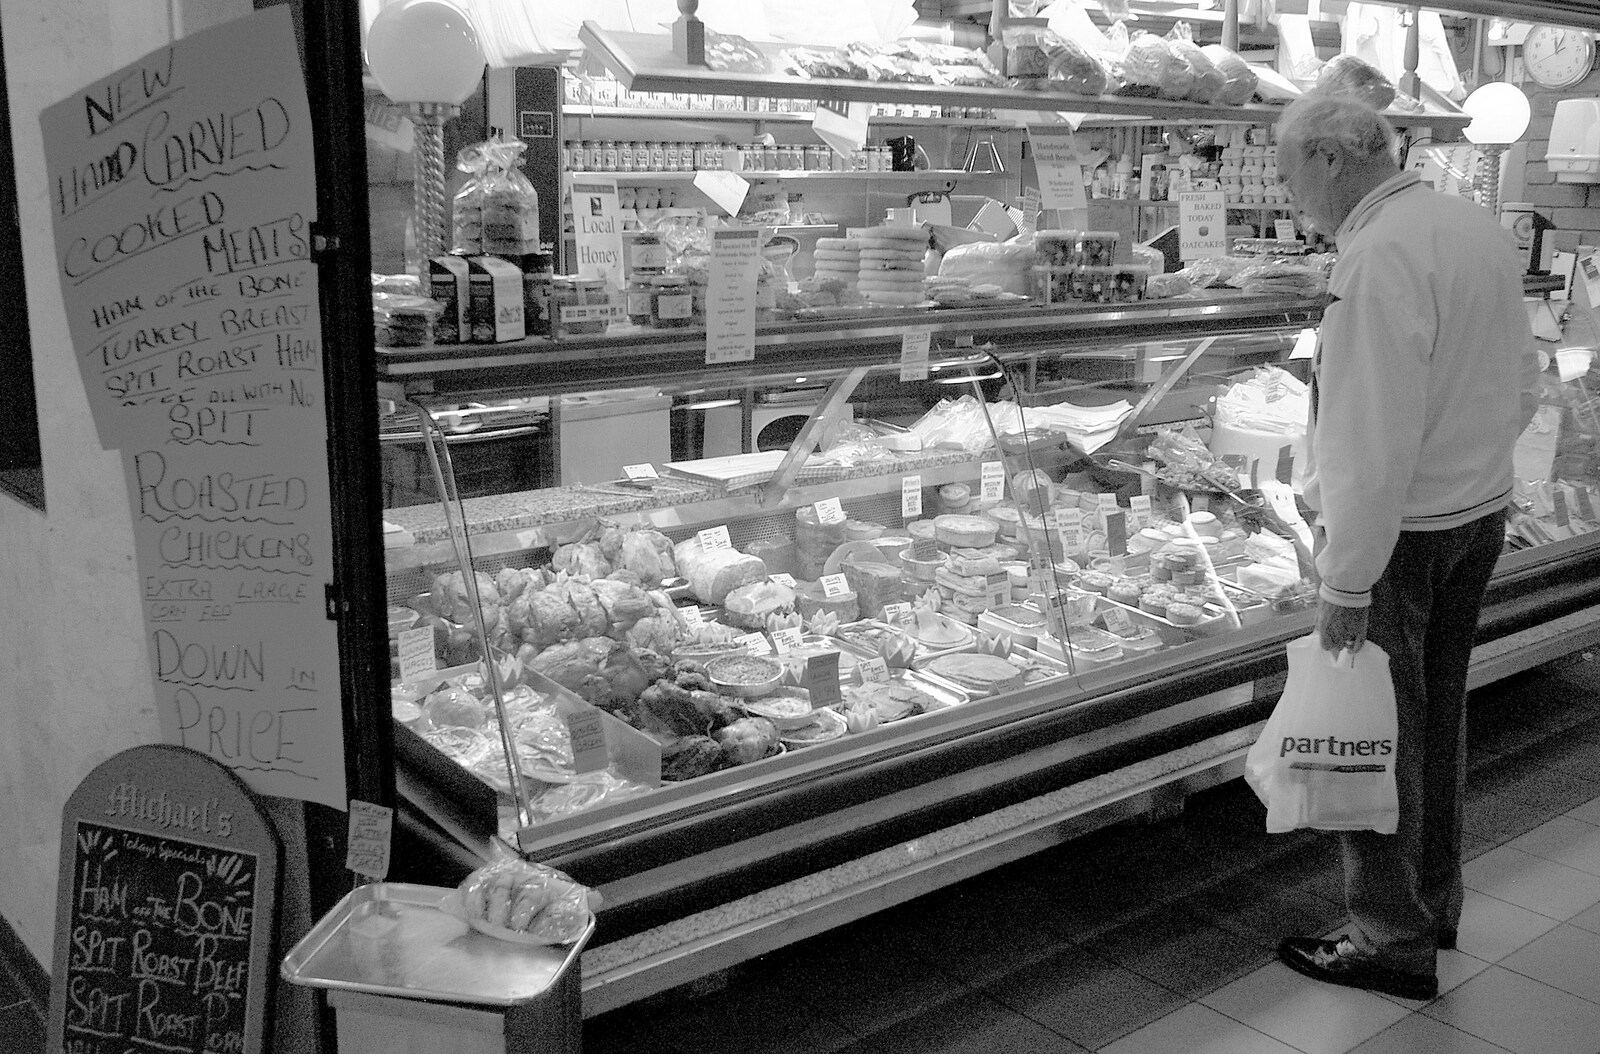 Some dude looks at a cold meats chiller from A Trip Around Macclesfield and Sandbach, Cheshire - 10th September 2005